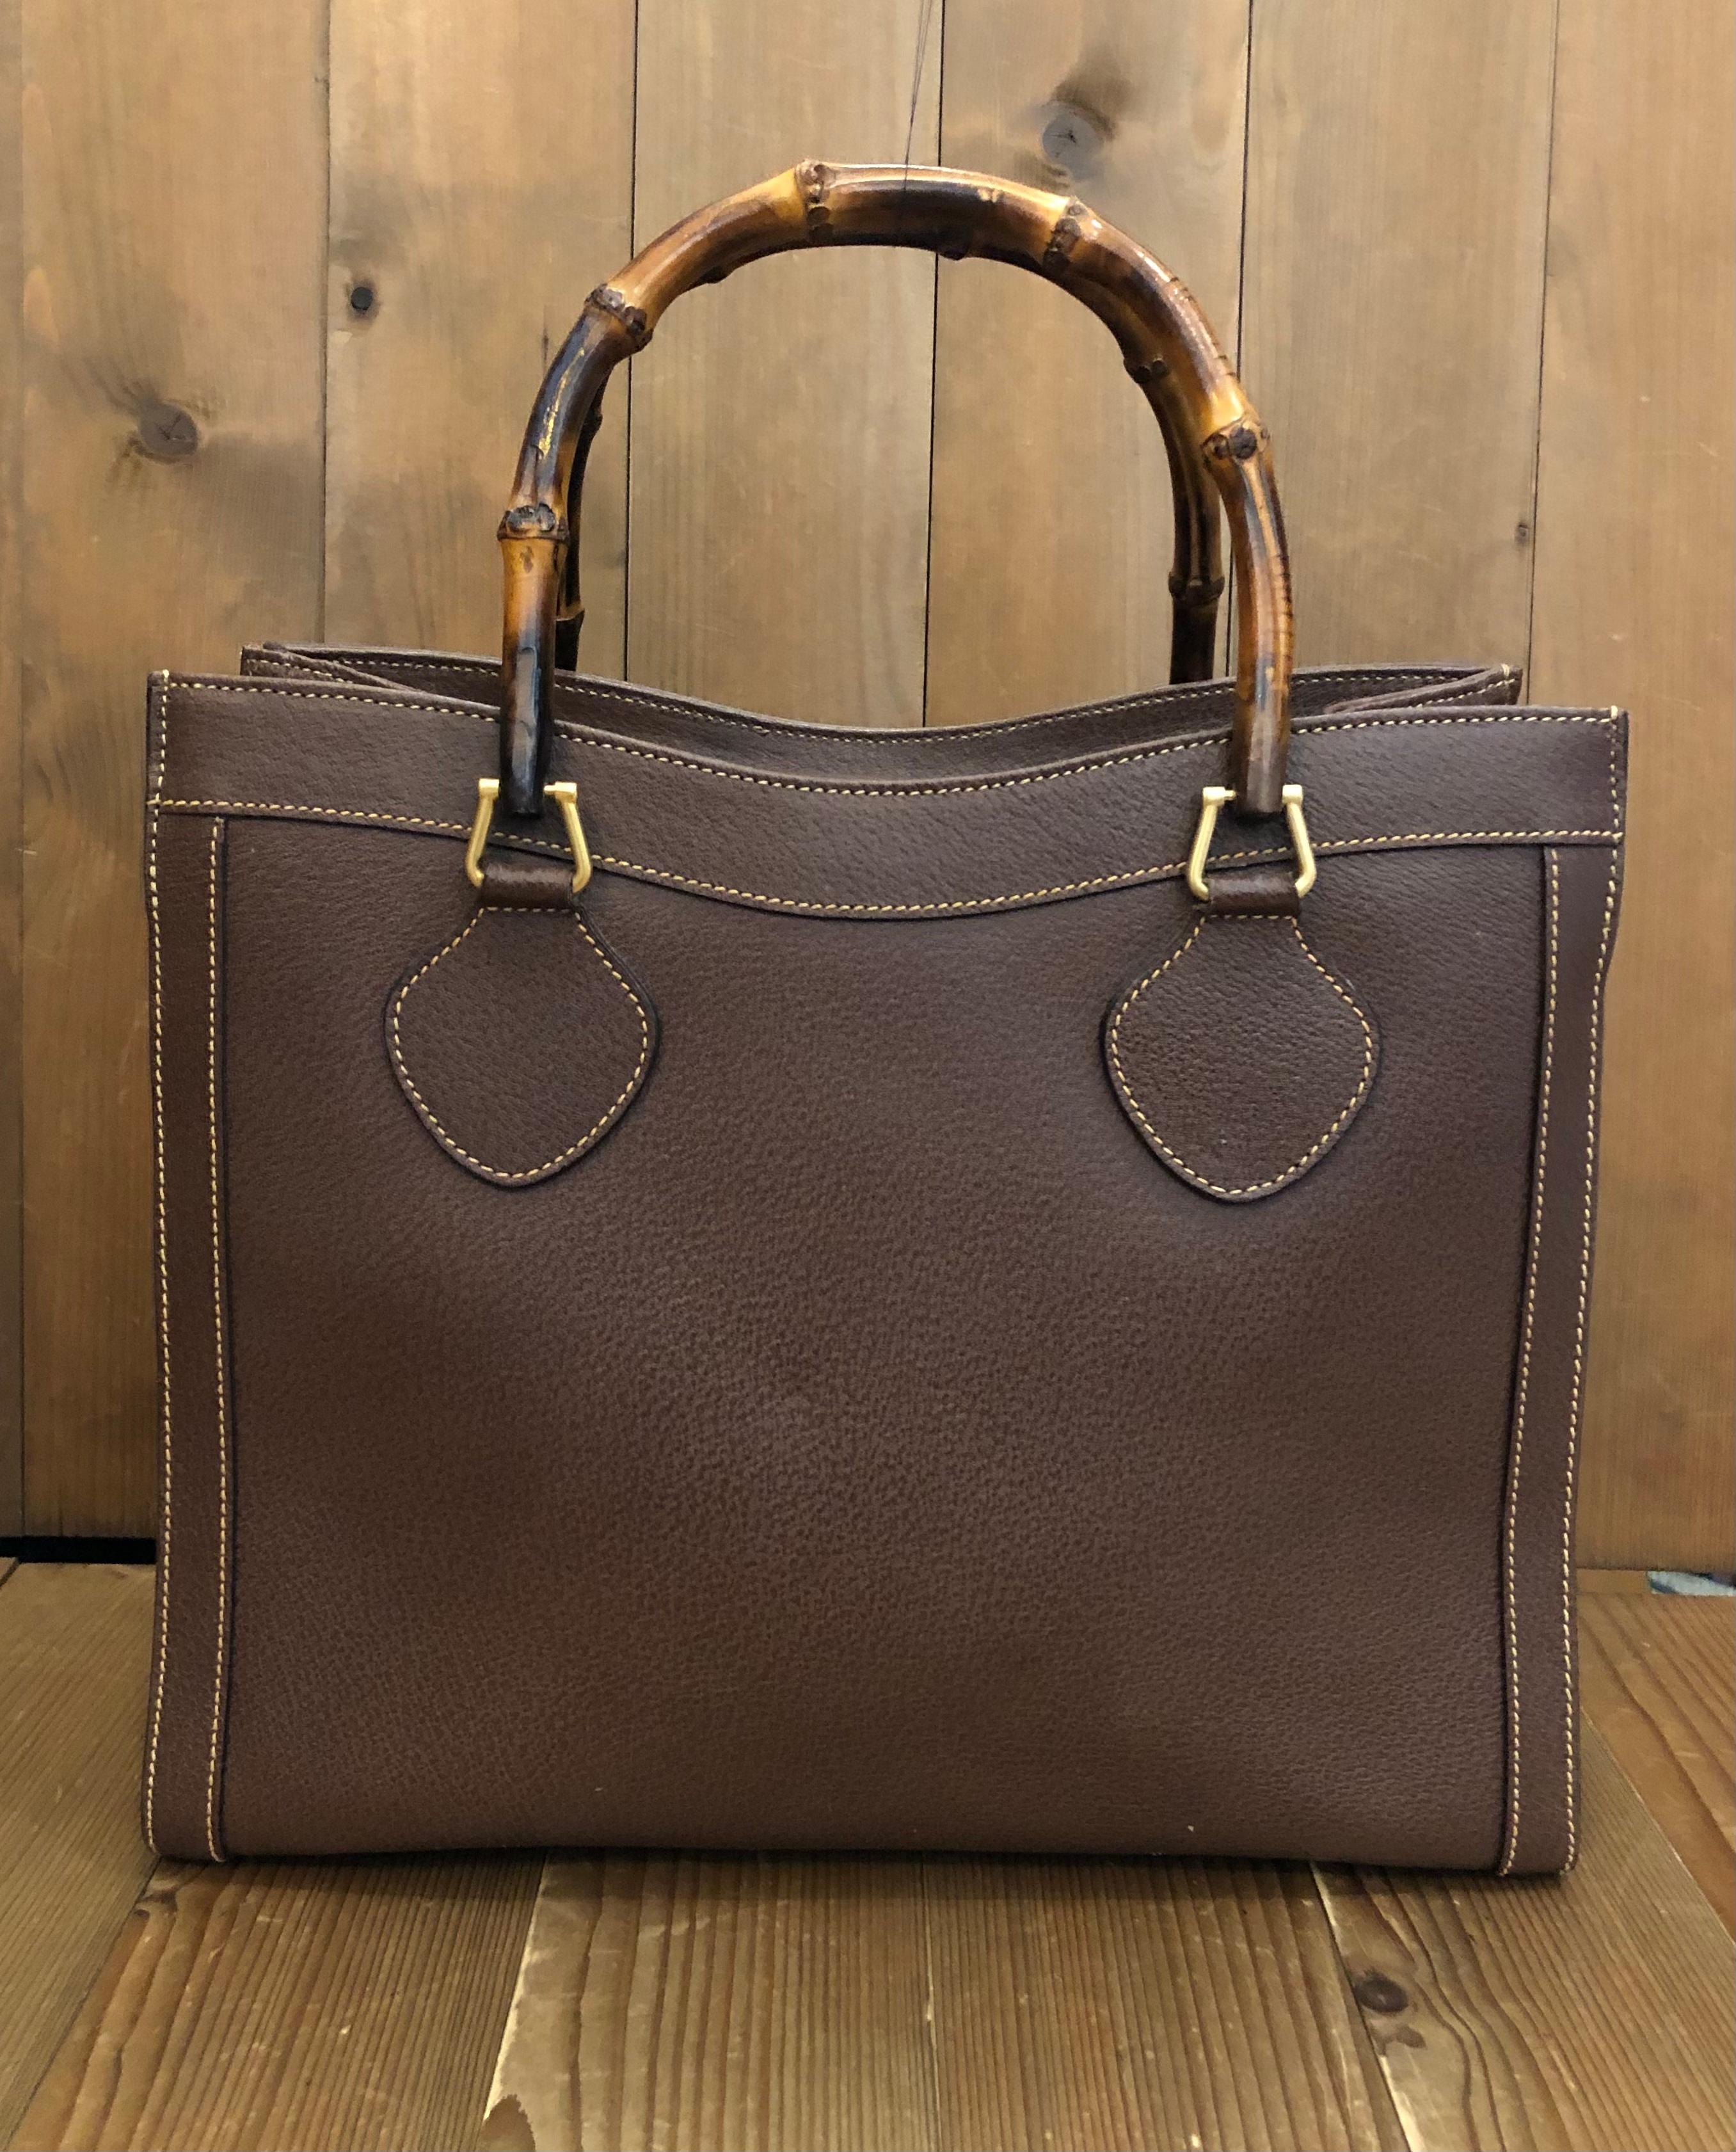 This vintage GUCCI Diana bamboo tote is crafted of pigskin’s leather in dark brown and matt gold toned hardware. Top magnetic snap closure opens to a new interior. It features two main compartments/one zip compartment and one interior zippered